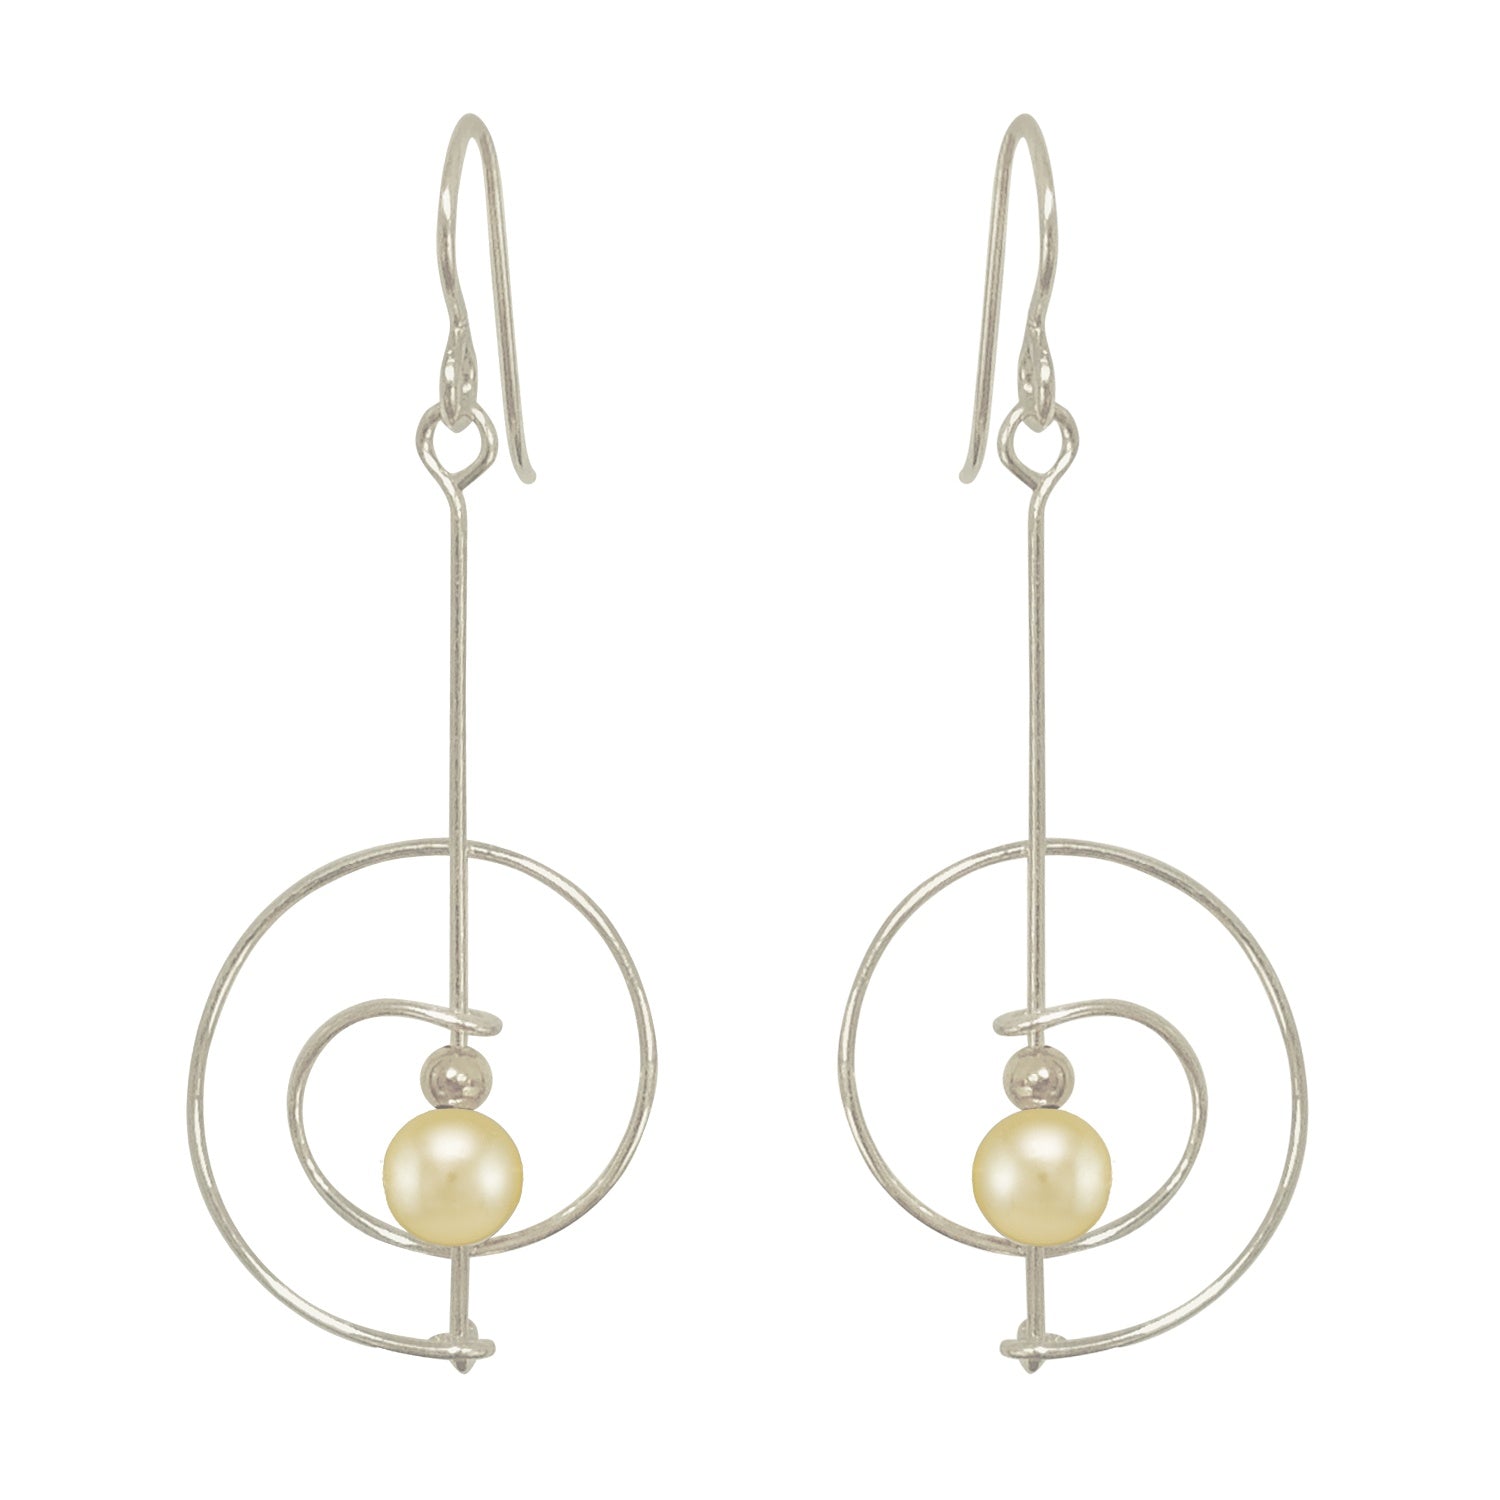 Spiral with Pearl Earrings